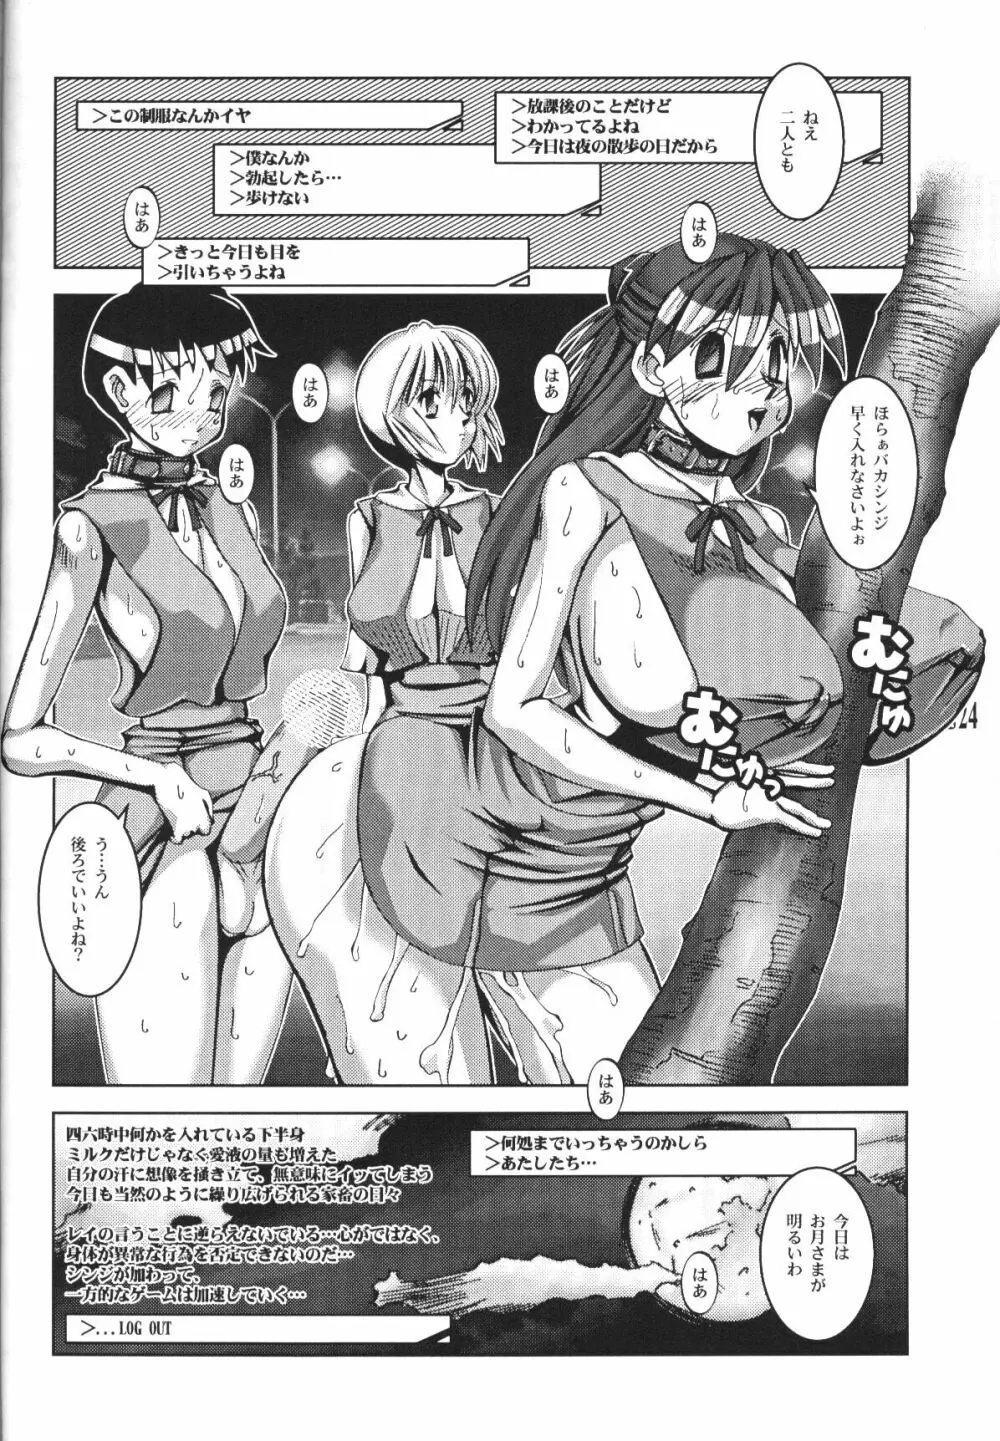 PLEATED GUNNER #09 BLACK AND WHITE 乳スカ Page.23